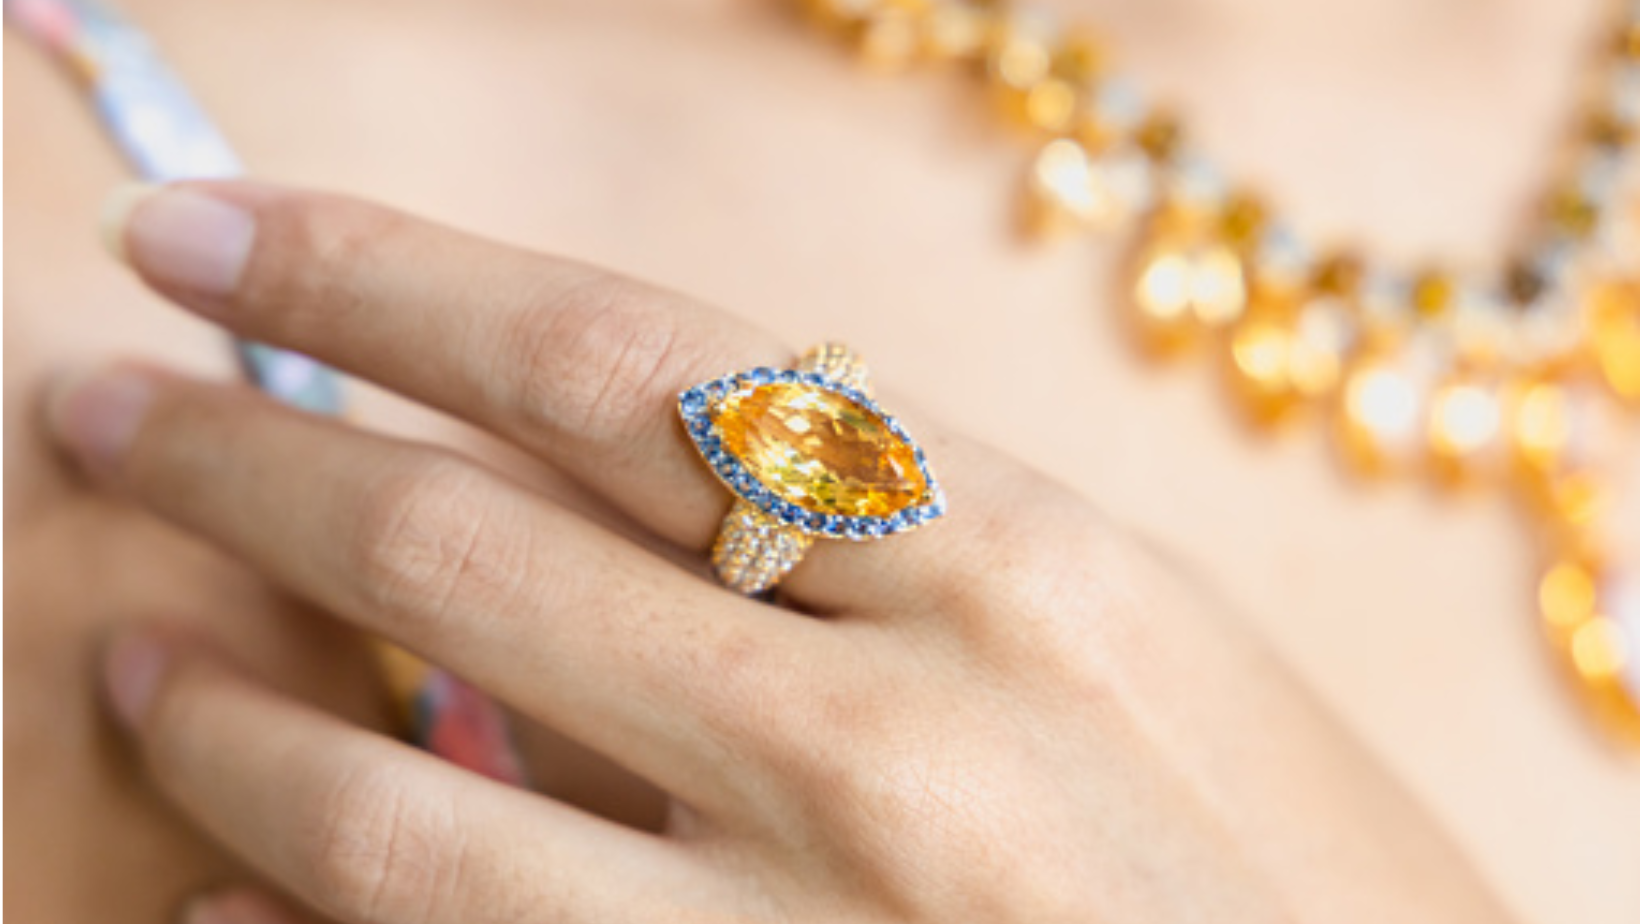 Yellow Sapphire Rings: A Unique Alternative To The Traditional Diamond Ring